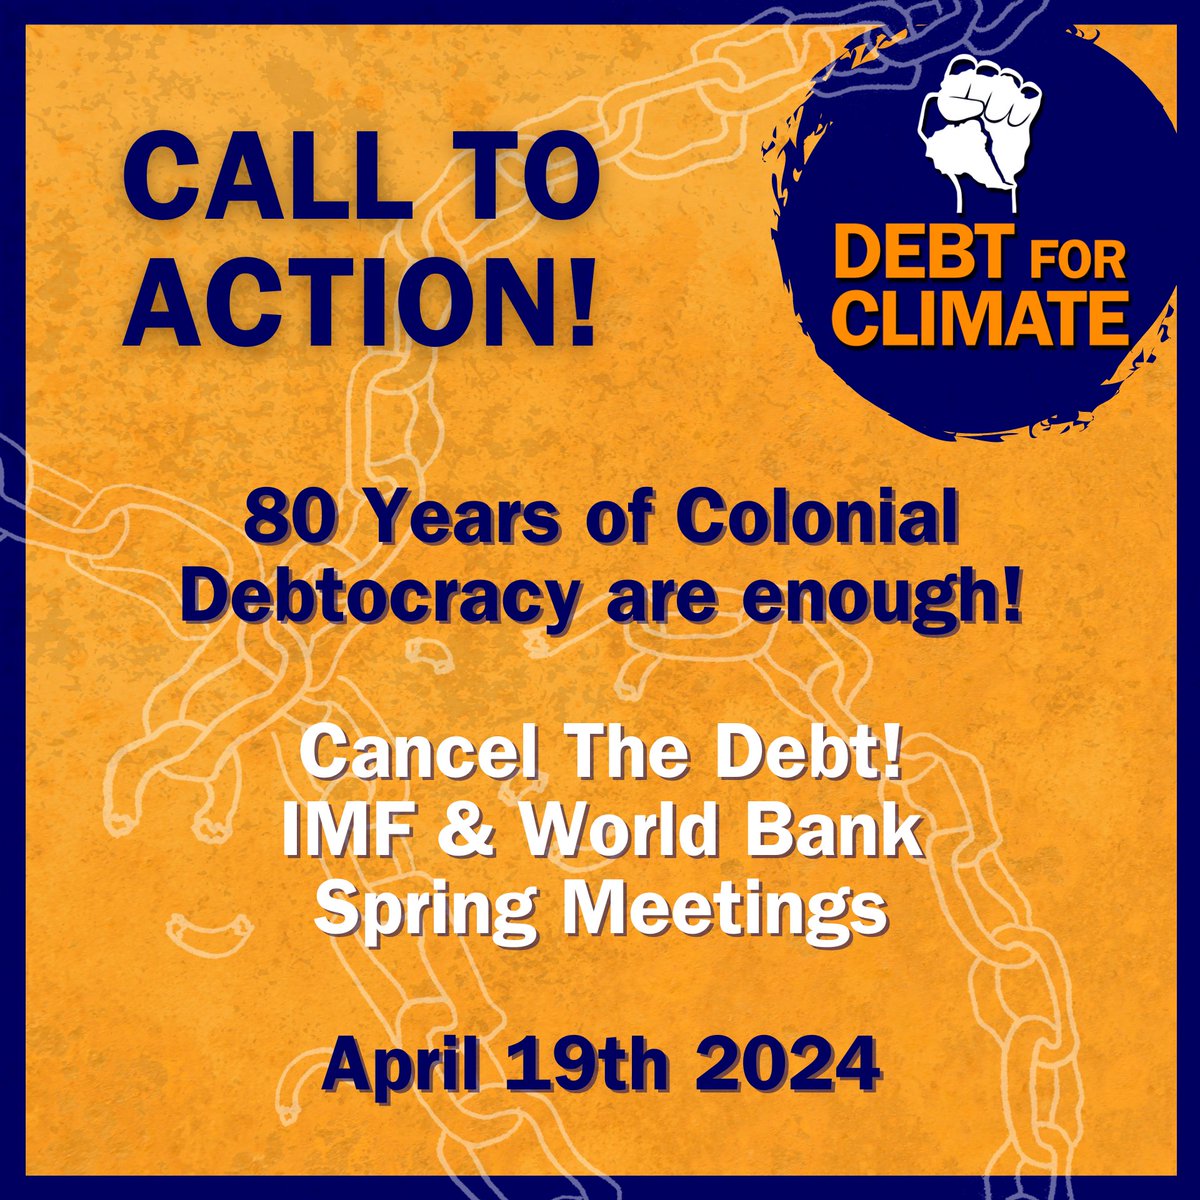 🧵1/7

🔊Call to Action🔊
⛔80 years of colonial debt is enough!🔥#CancelTheDebt
🎯IMF & World Bank Spring Meetings on April 19, 2024
#80YearsAreEnough #CancelTheDebt